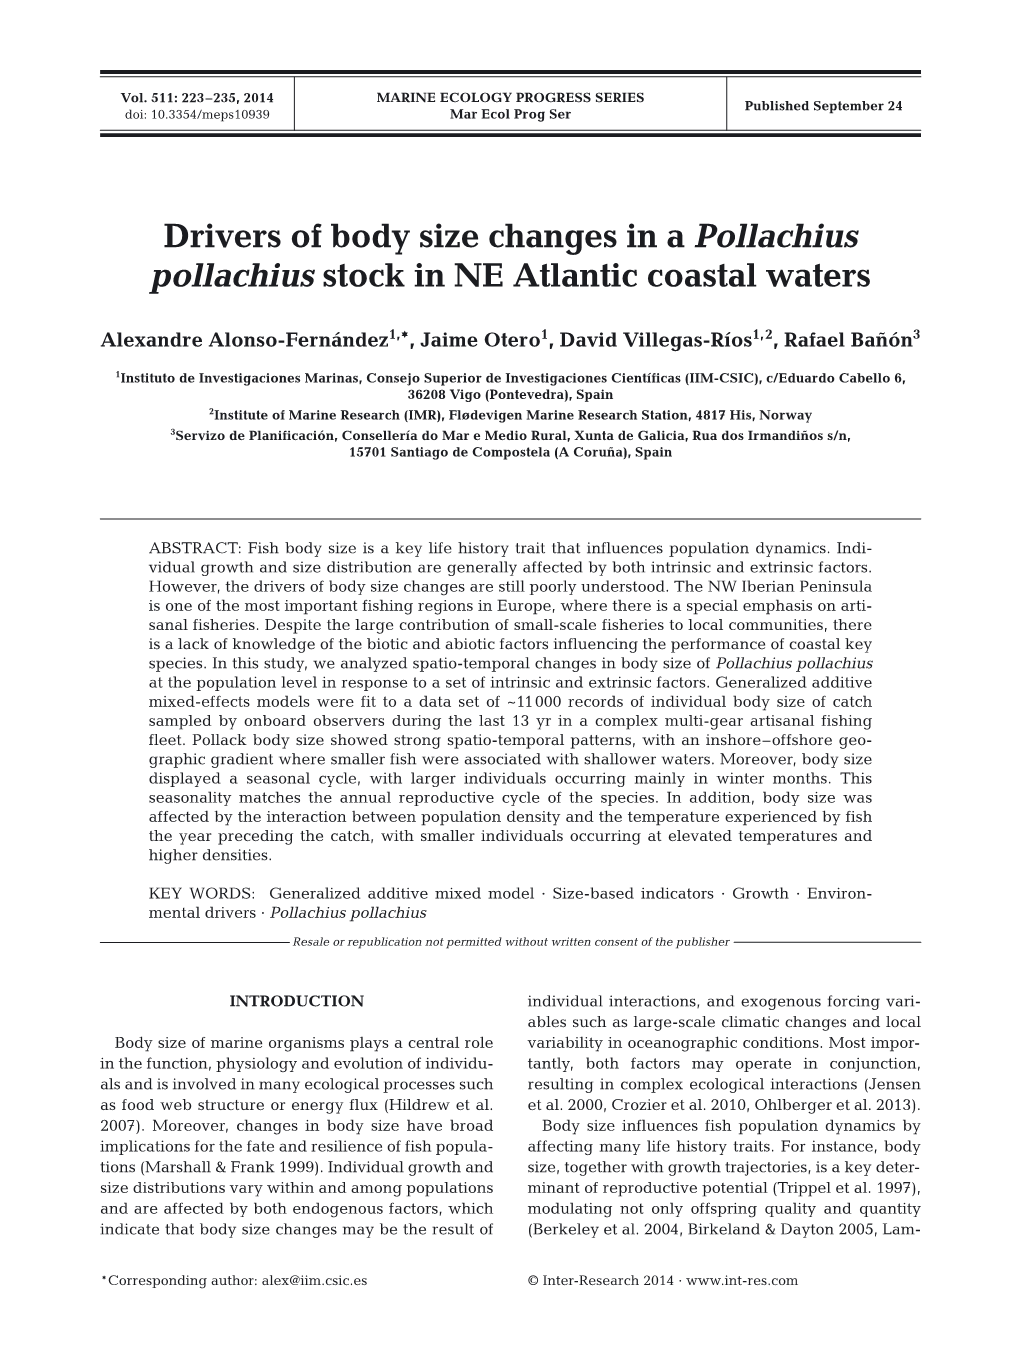 Drivers of Body Size Changes in a Pollachius Pollachius Stock in NE Atlantic Coastal Waters